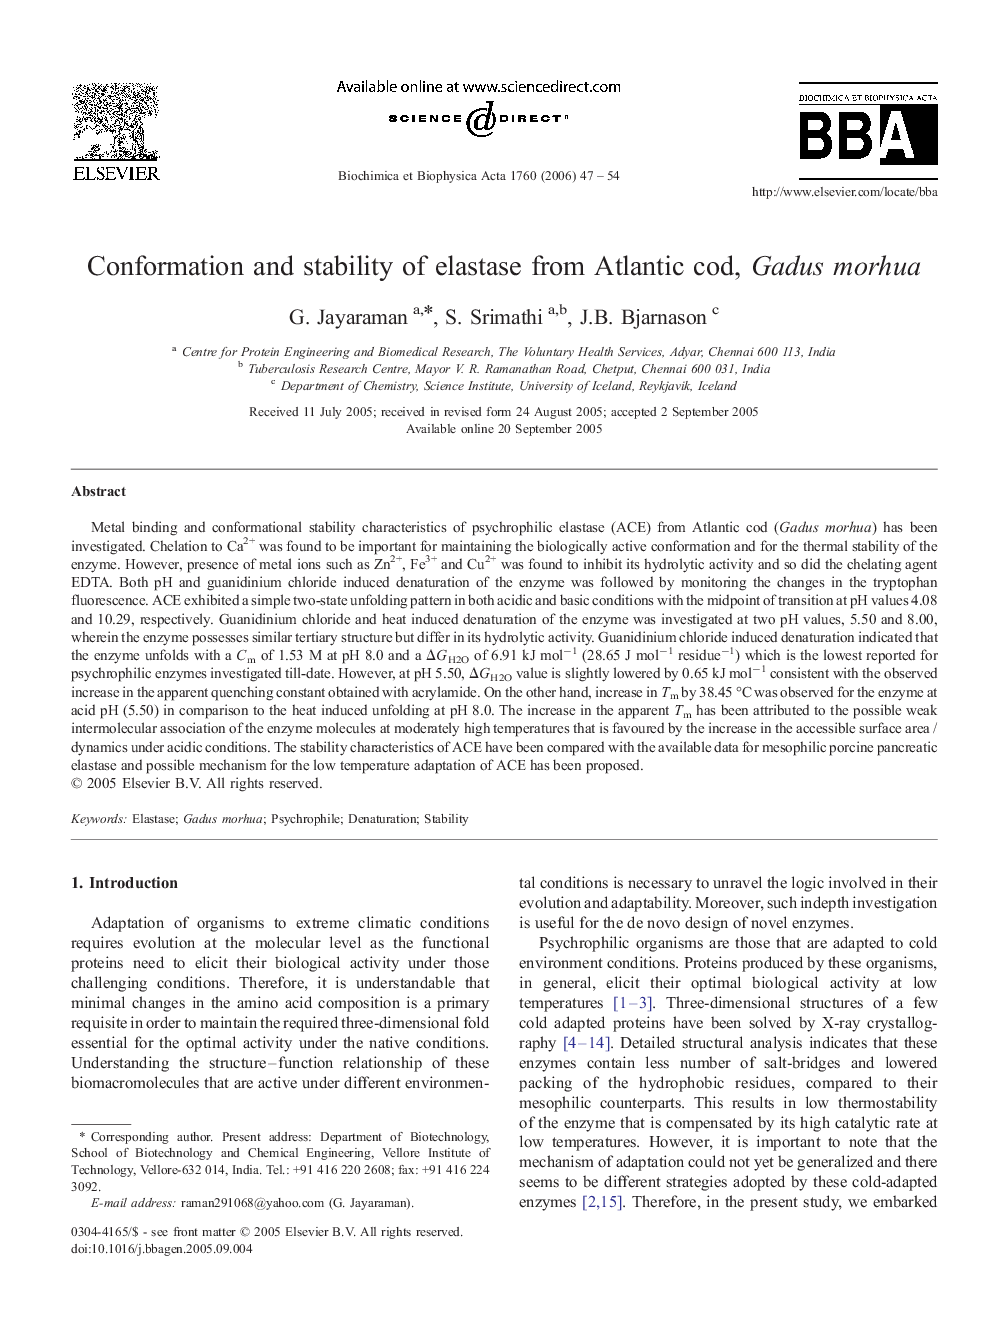 Conformation and stability of elastase from Atlantic cod, Gadus morhua